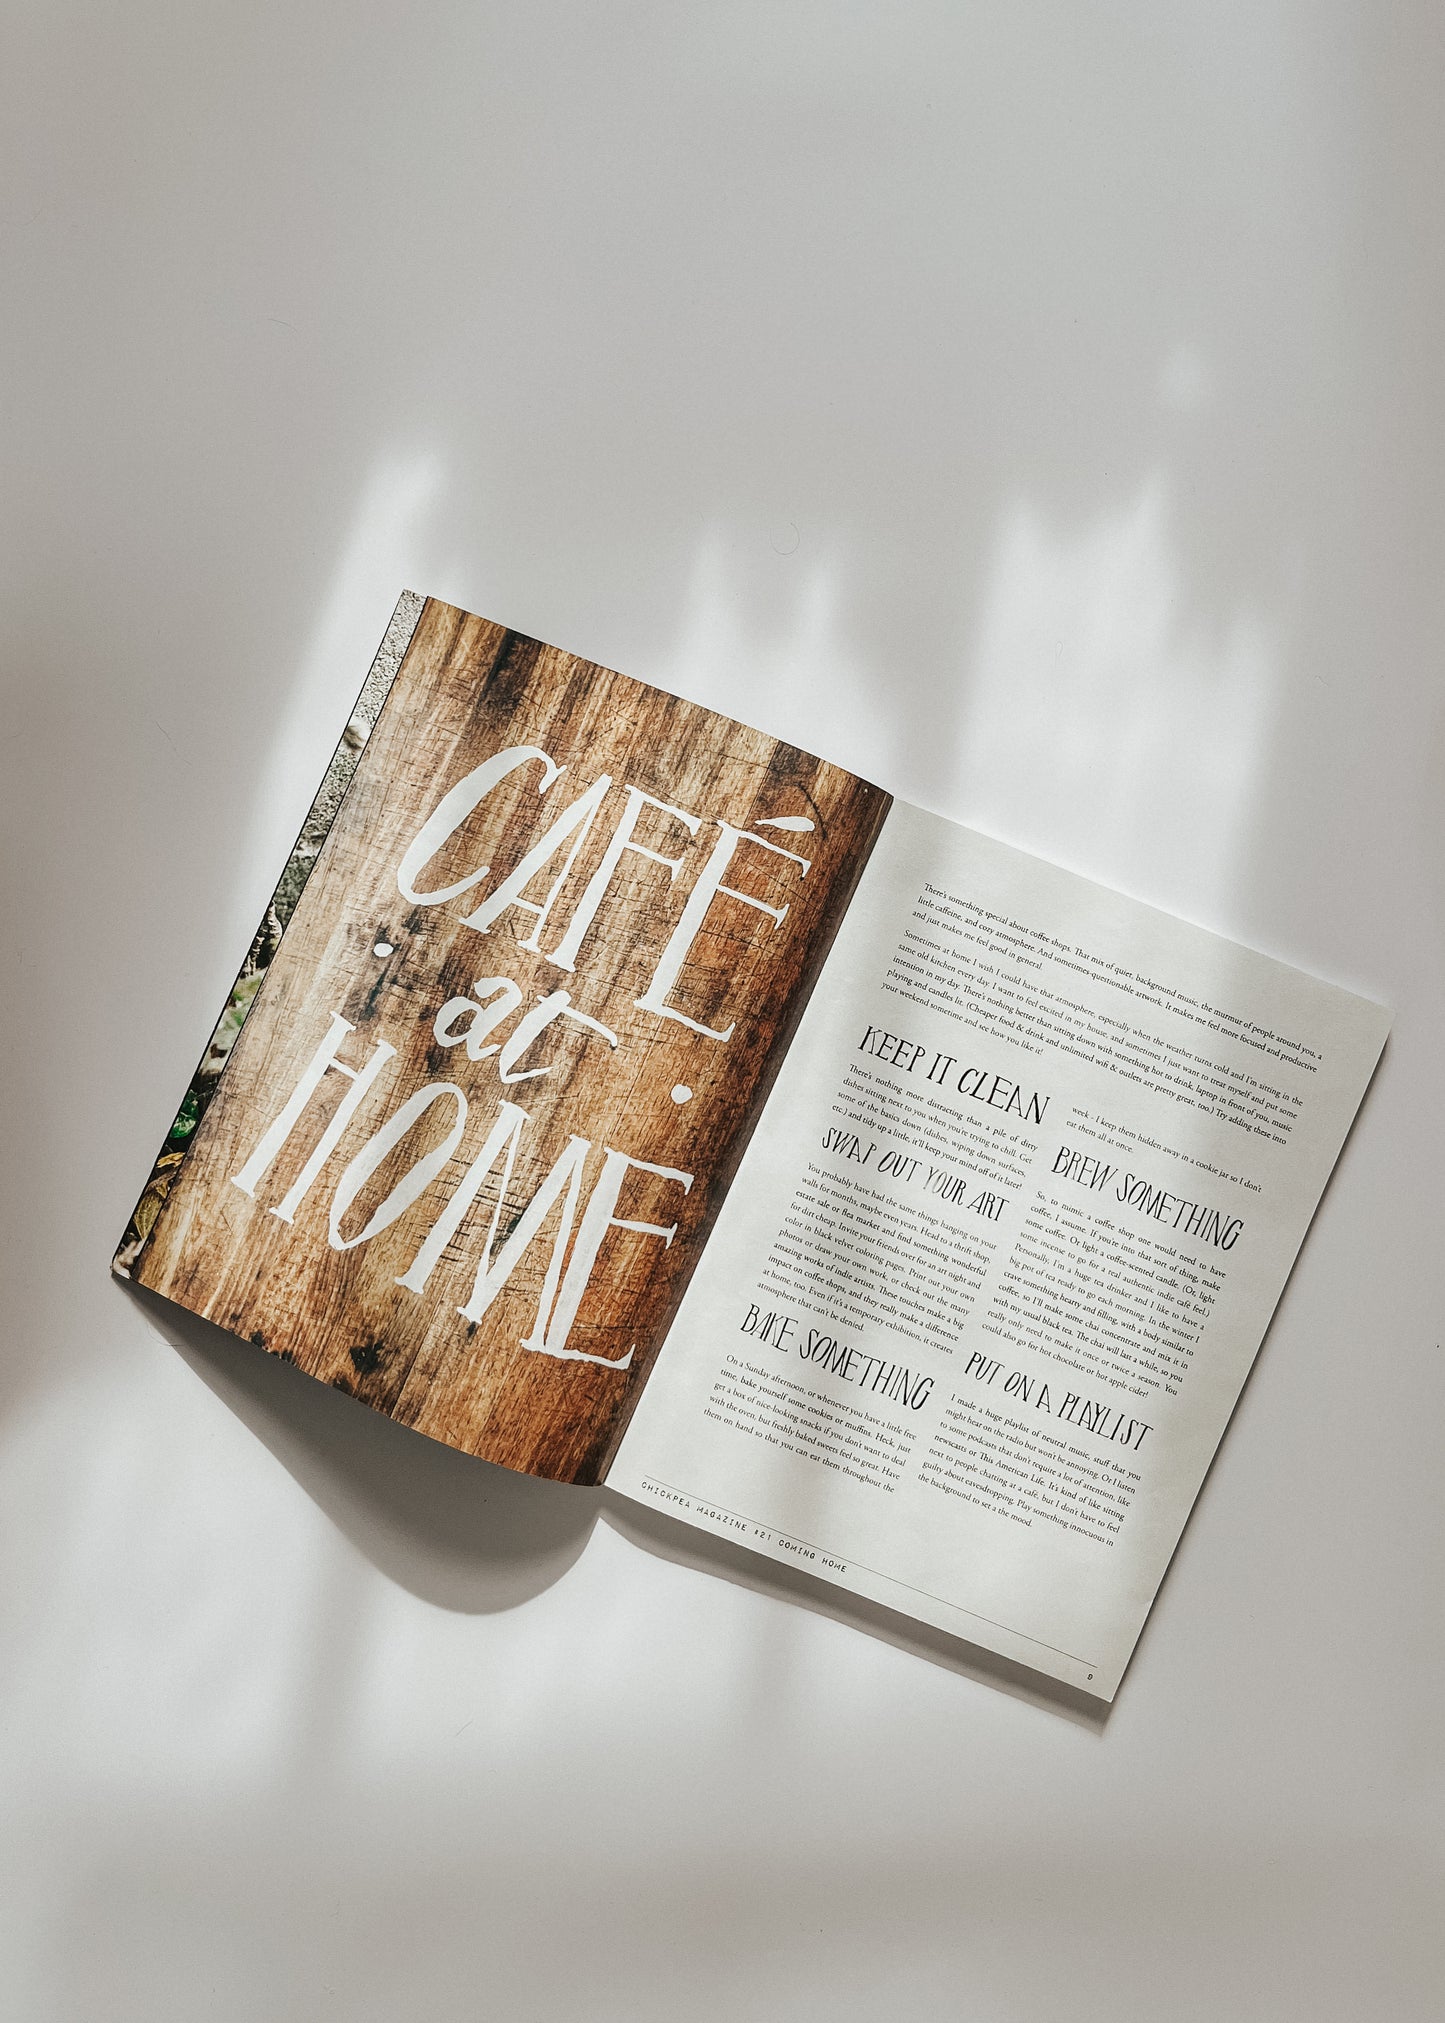 Issue 21: Coming Home